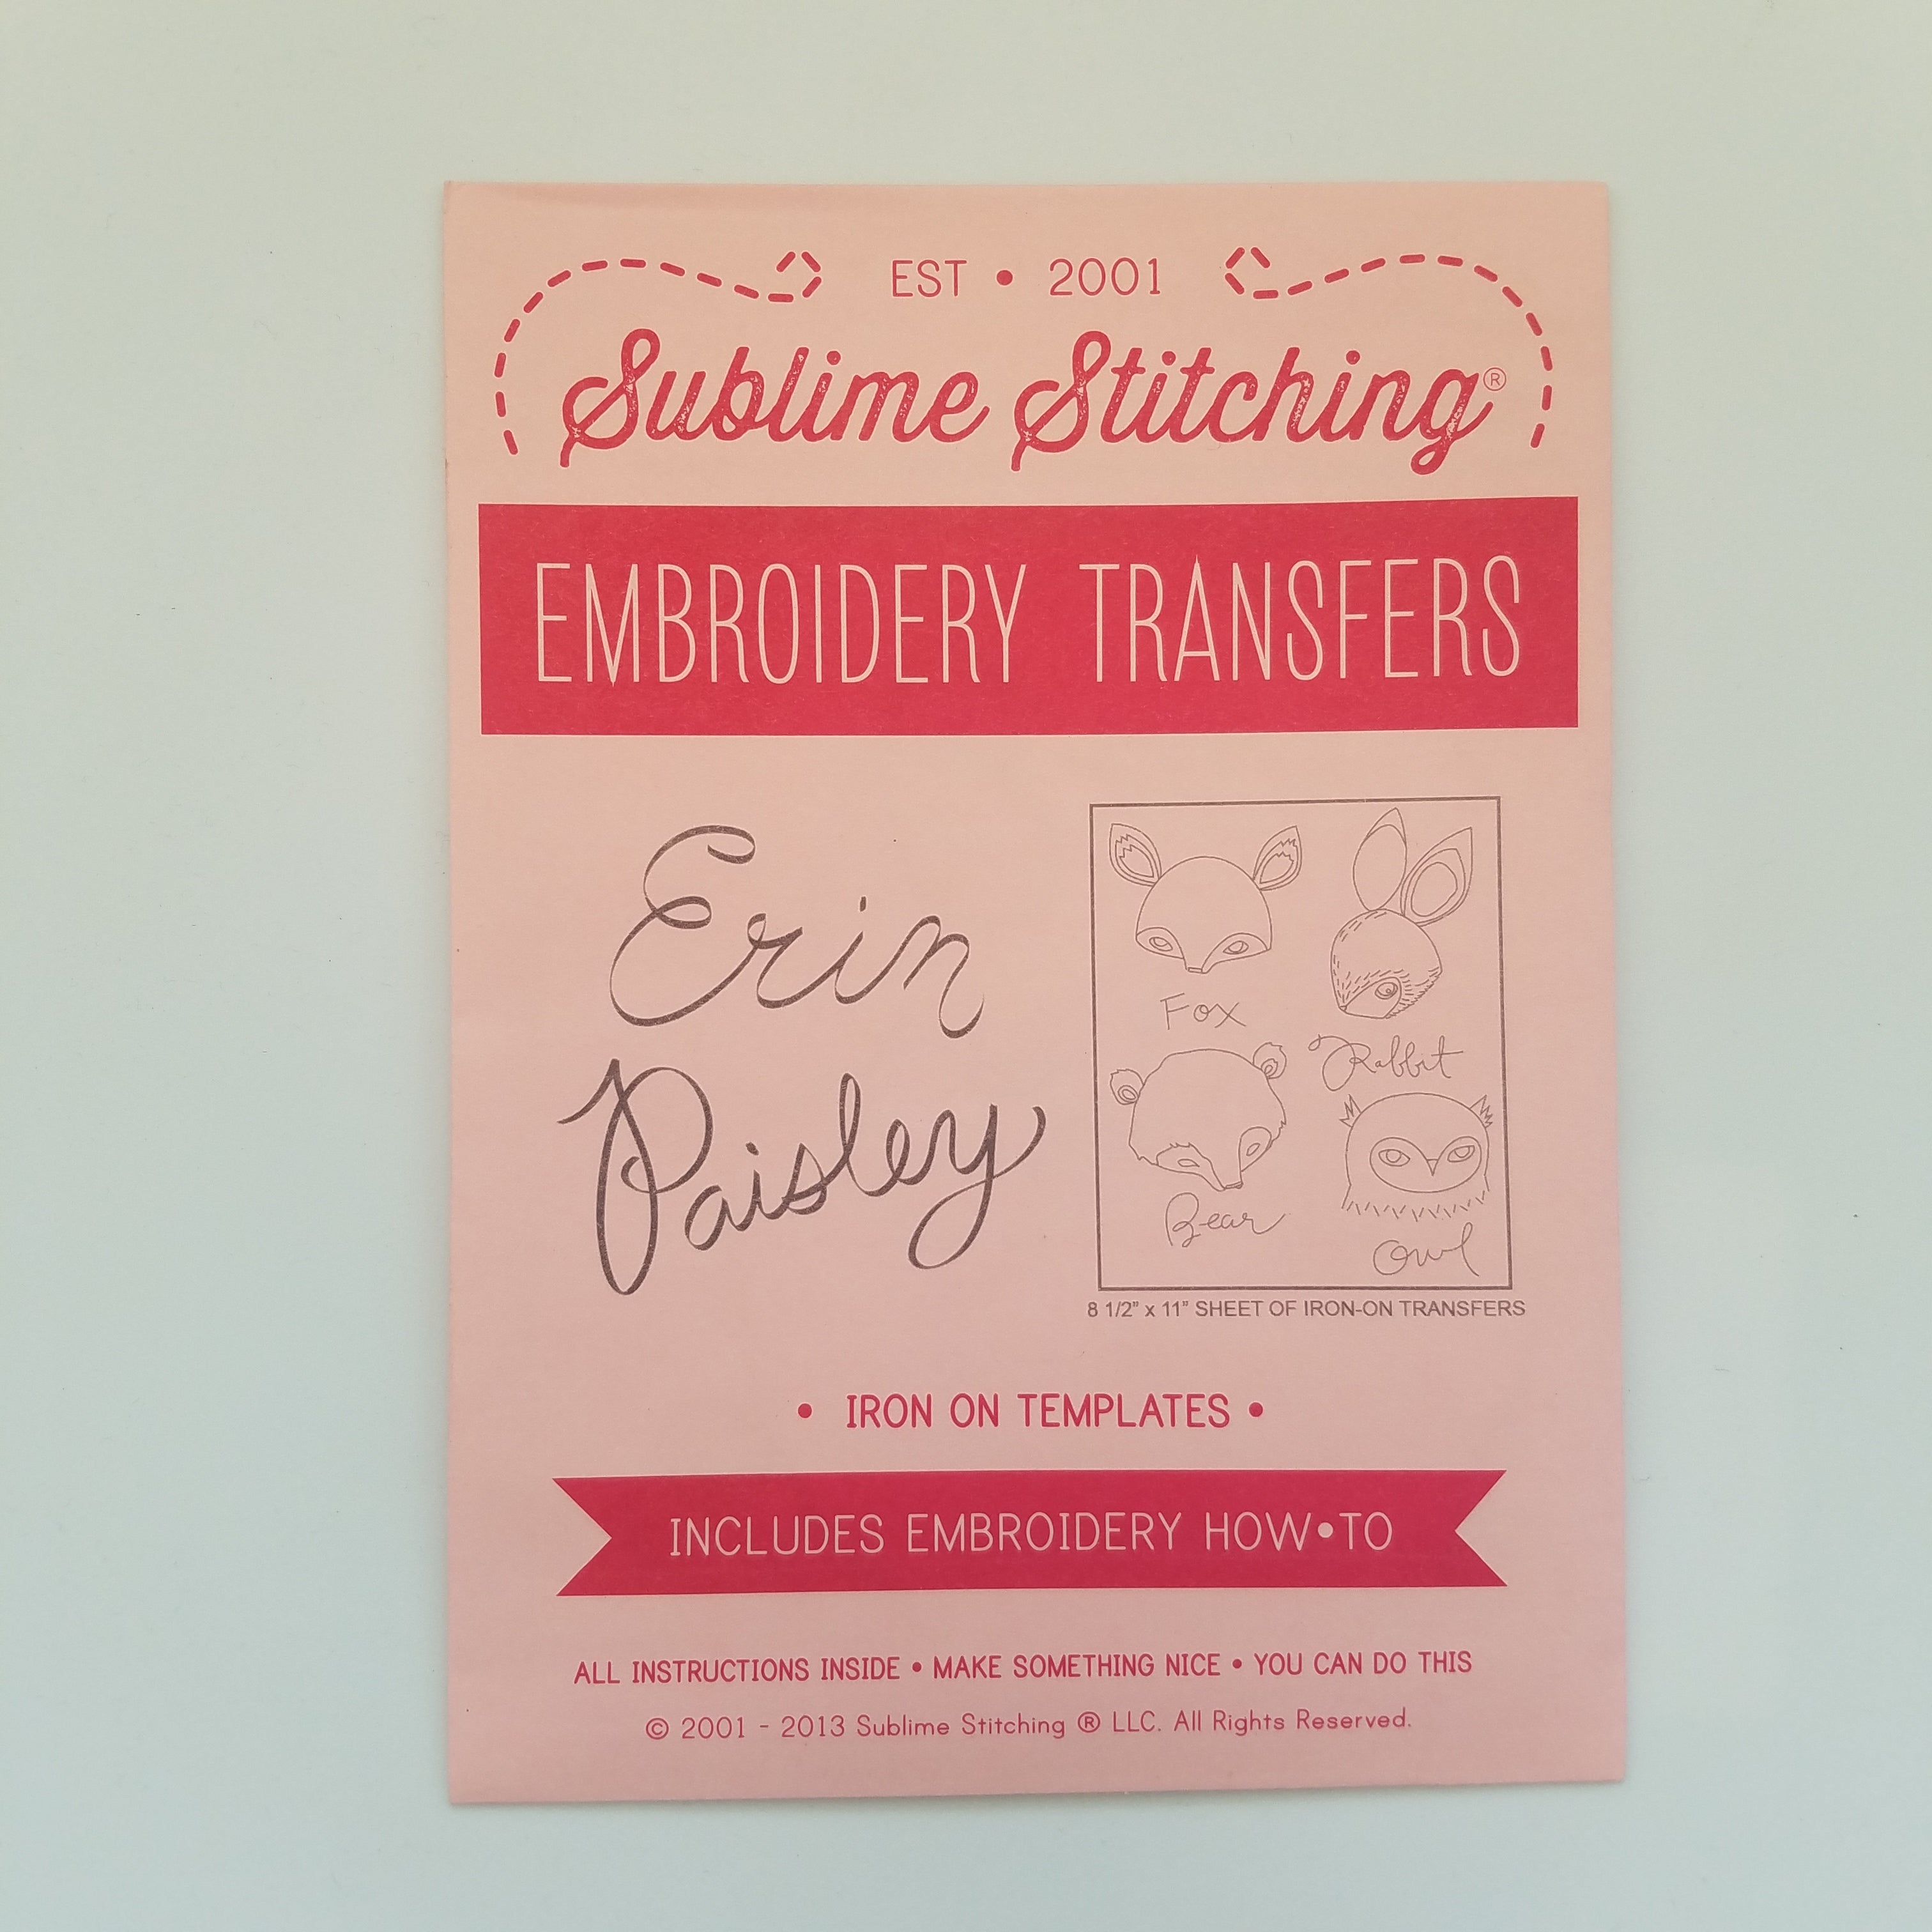 Sublime Stitching Erin Paisley Embroidery Transfers – Maker General